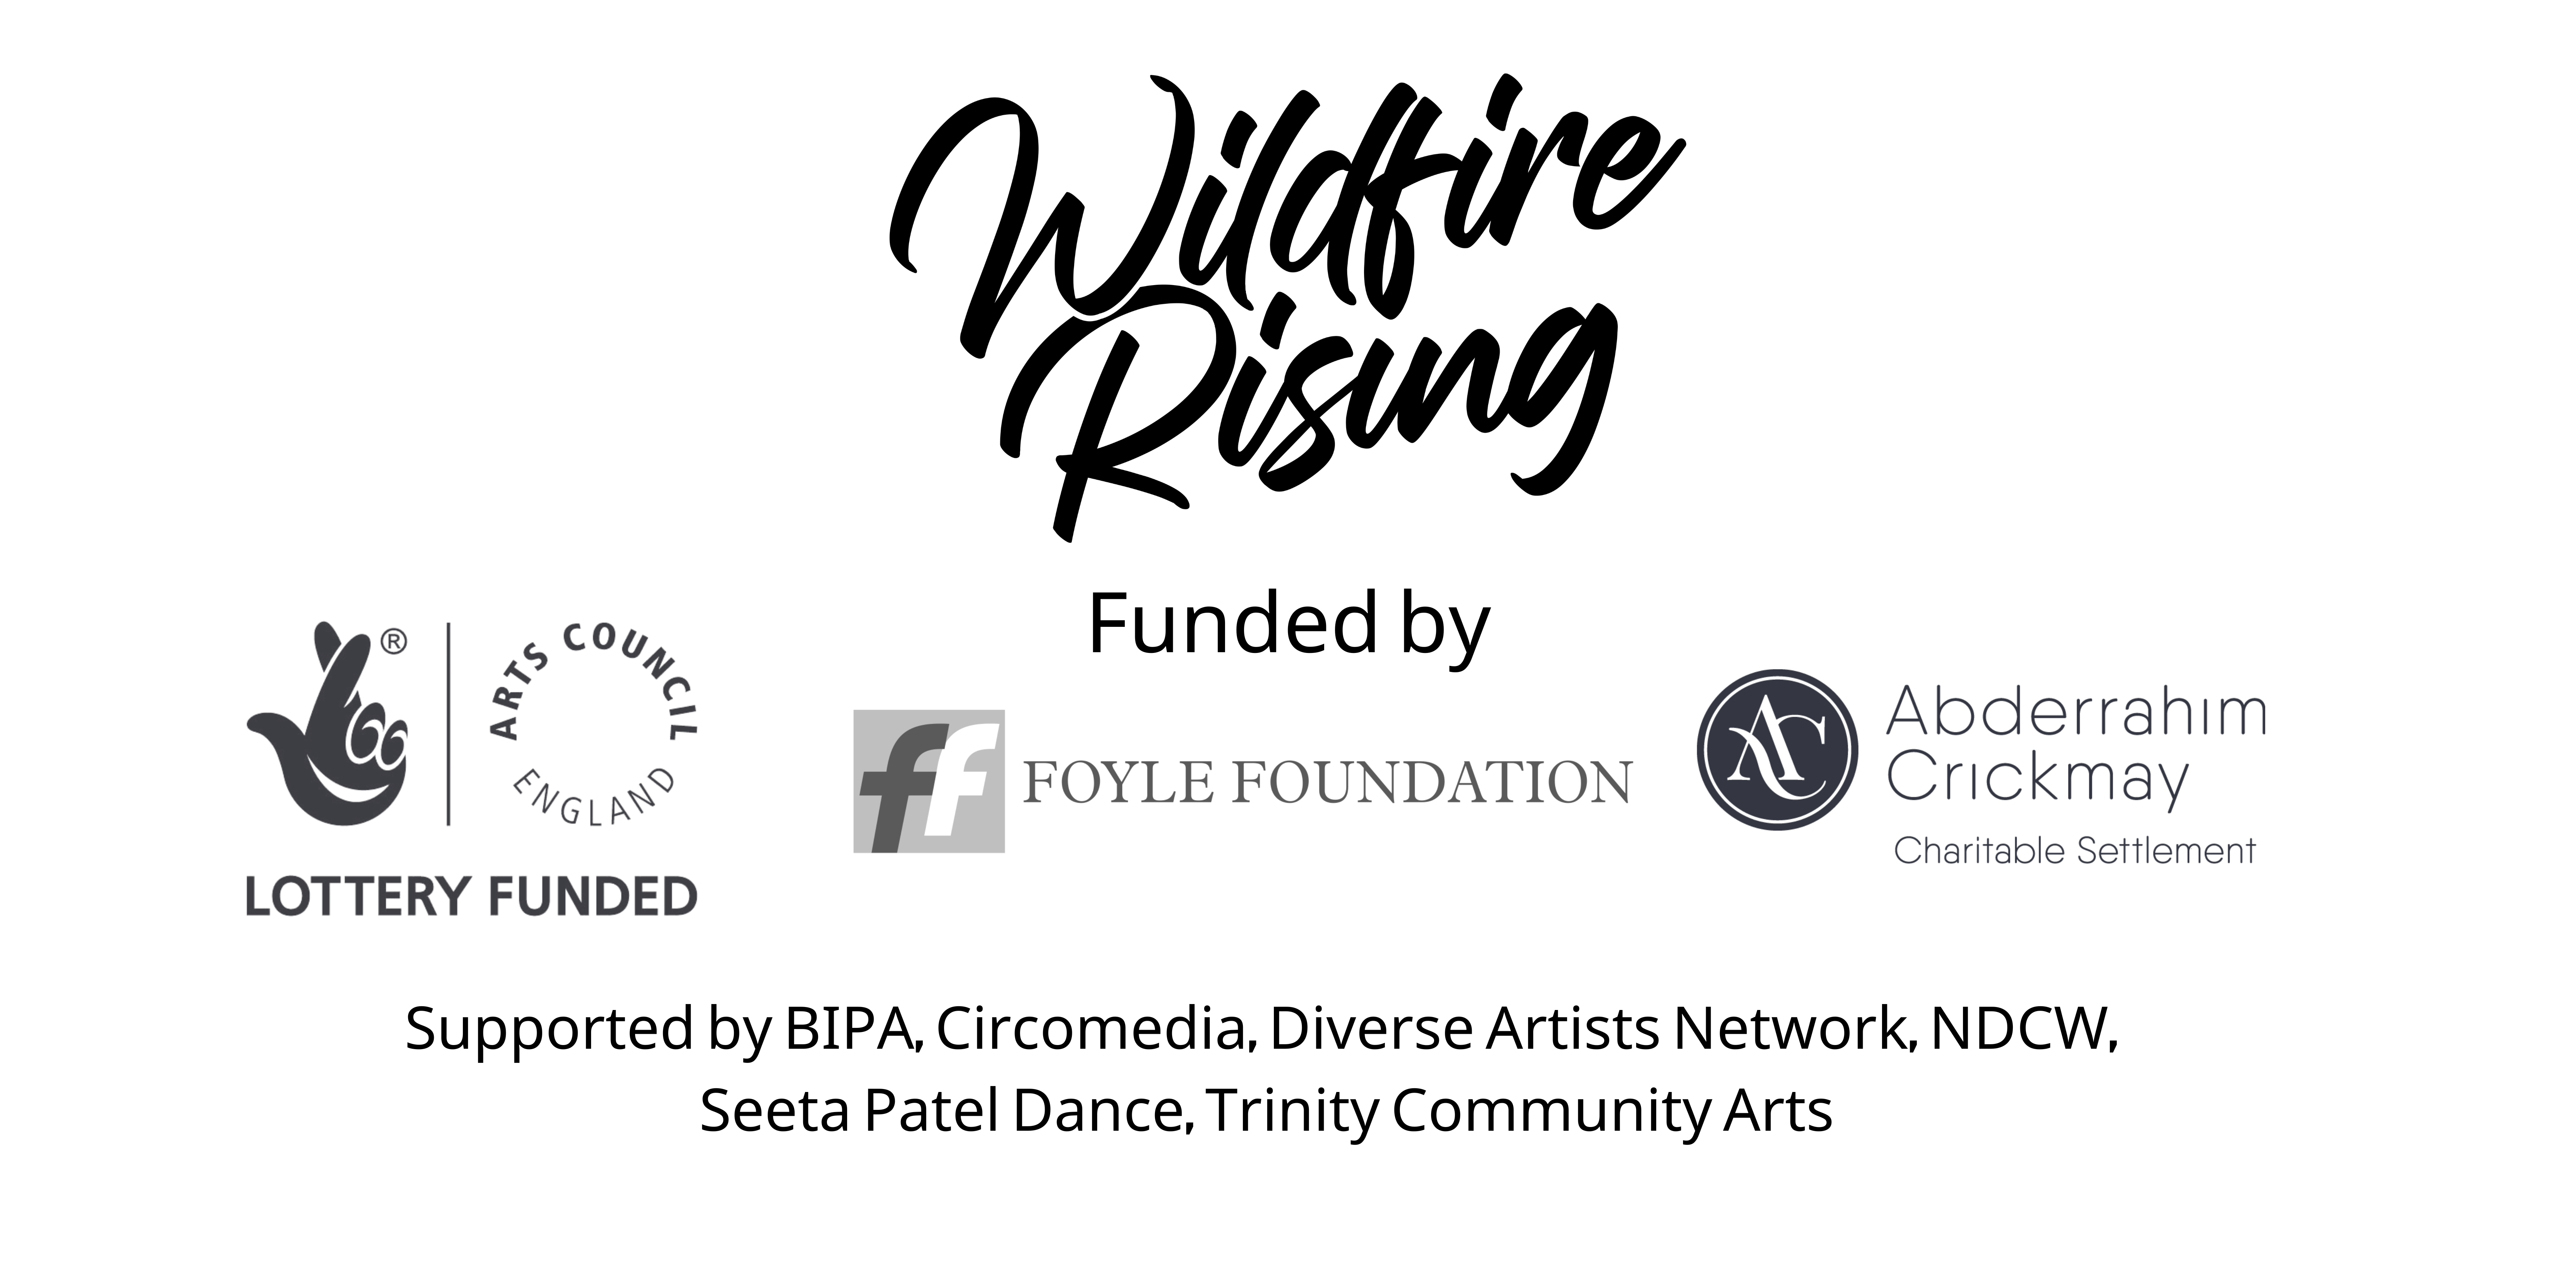 Logos of Wildfire Rising. Funded by Arts Council Lottery Funding, Foyle Foundation, Adberrahim Crickmay. Supported by BIPA, Circomedia, Diverse Artists Network, NDCW, Seeta Patel Dance, Trinity Community Arts